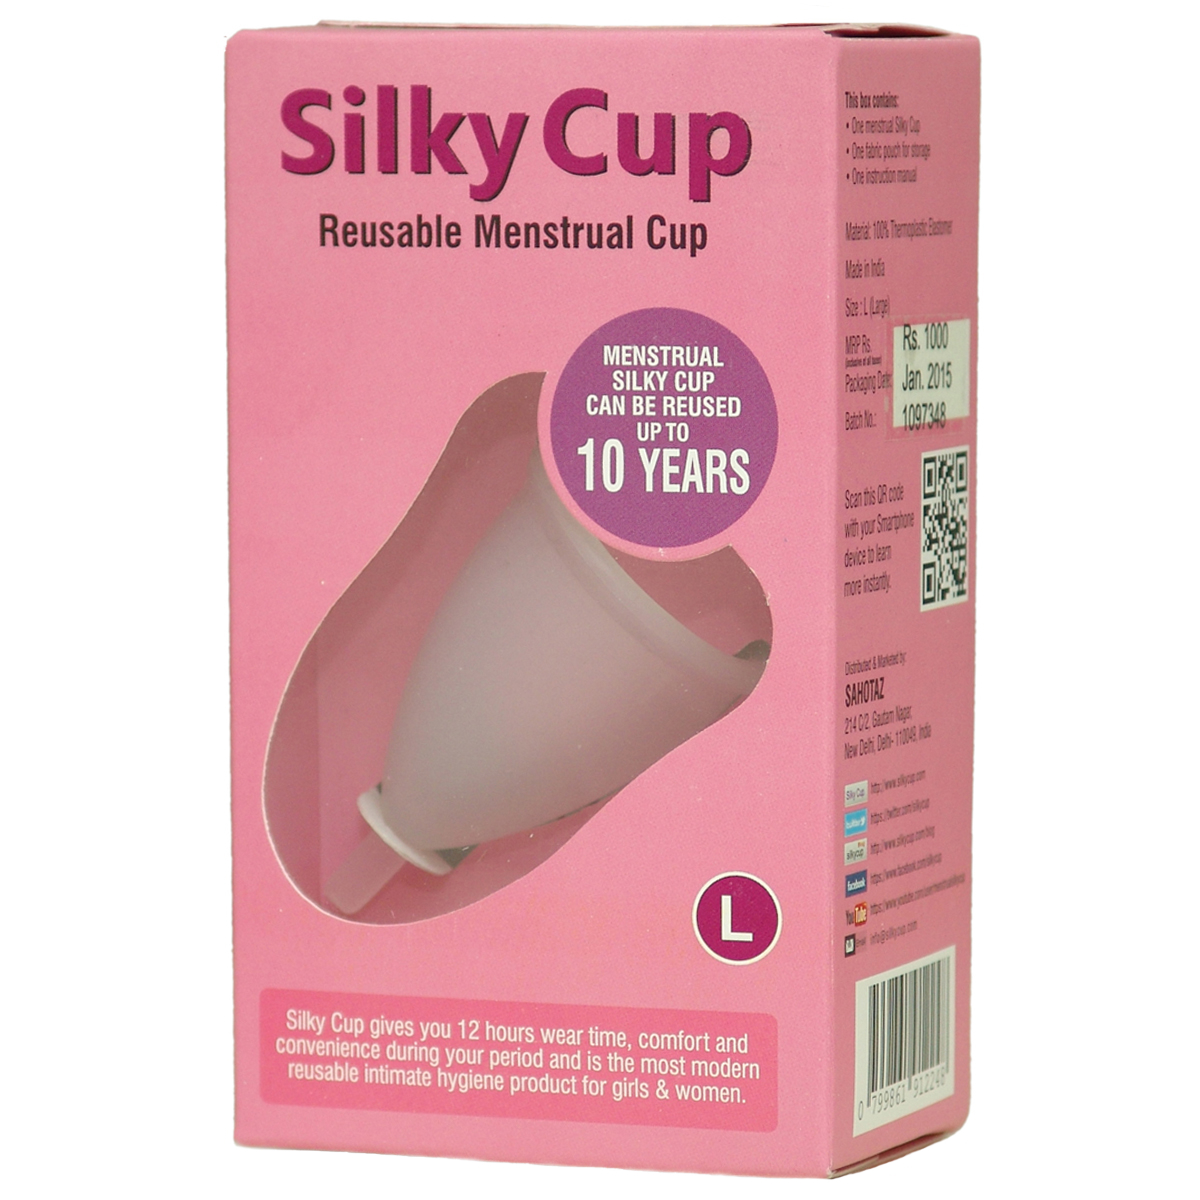 Silky Cup Reusable Menstrual Cup is tampon alternative 